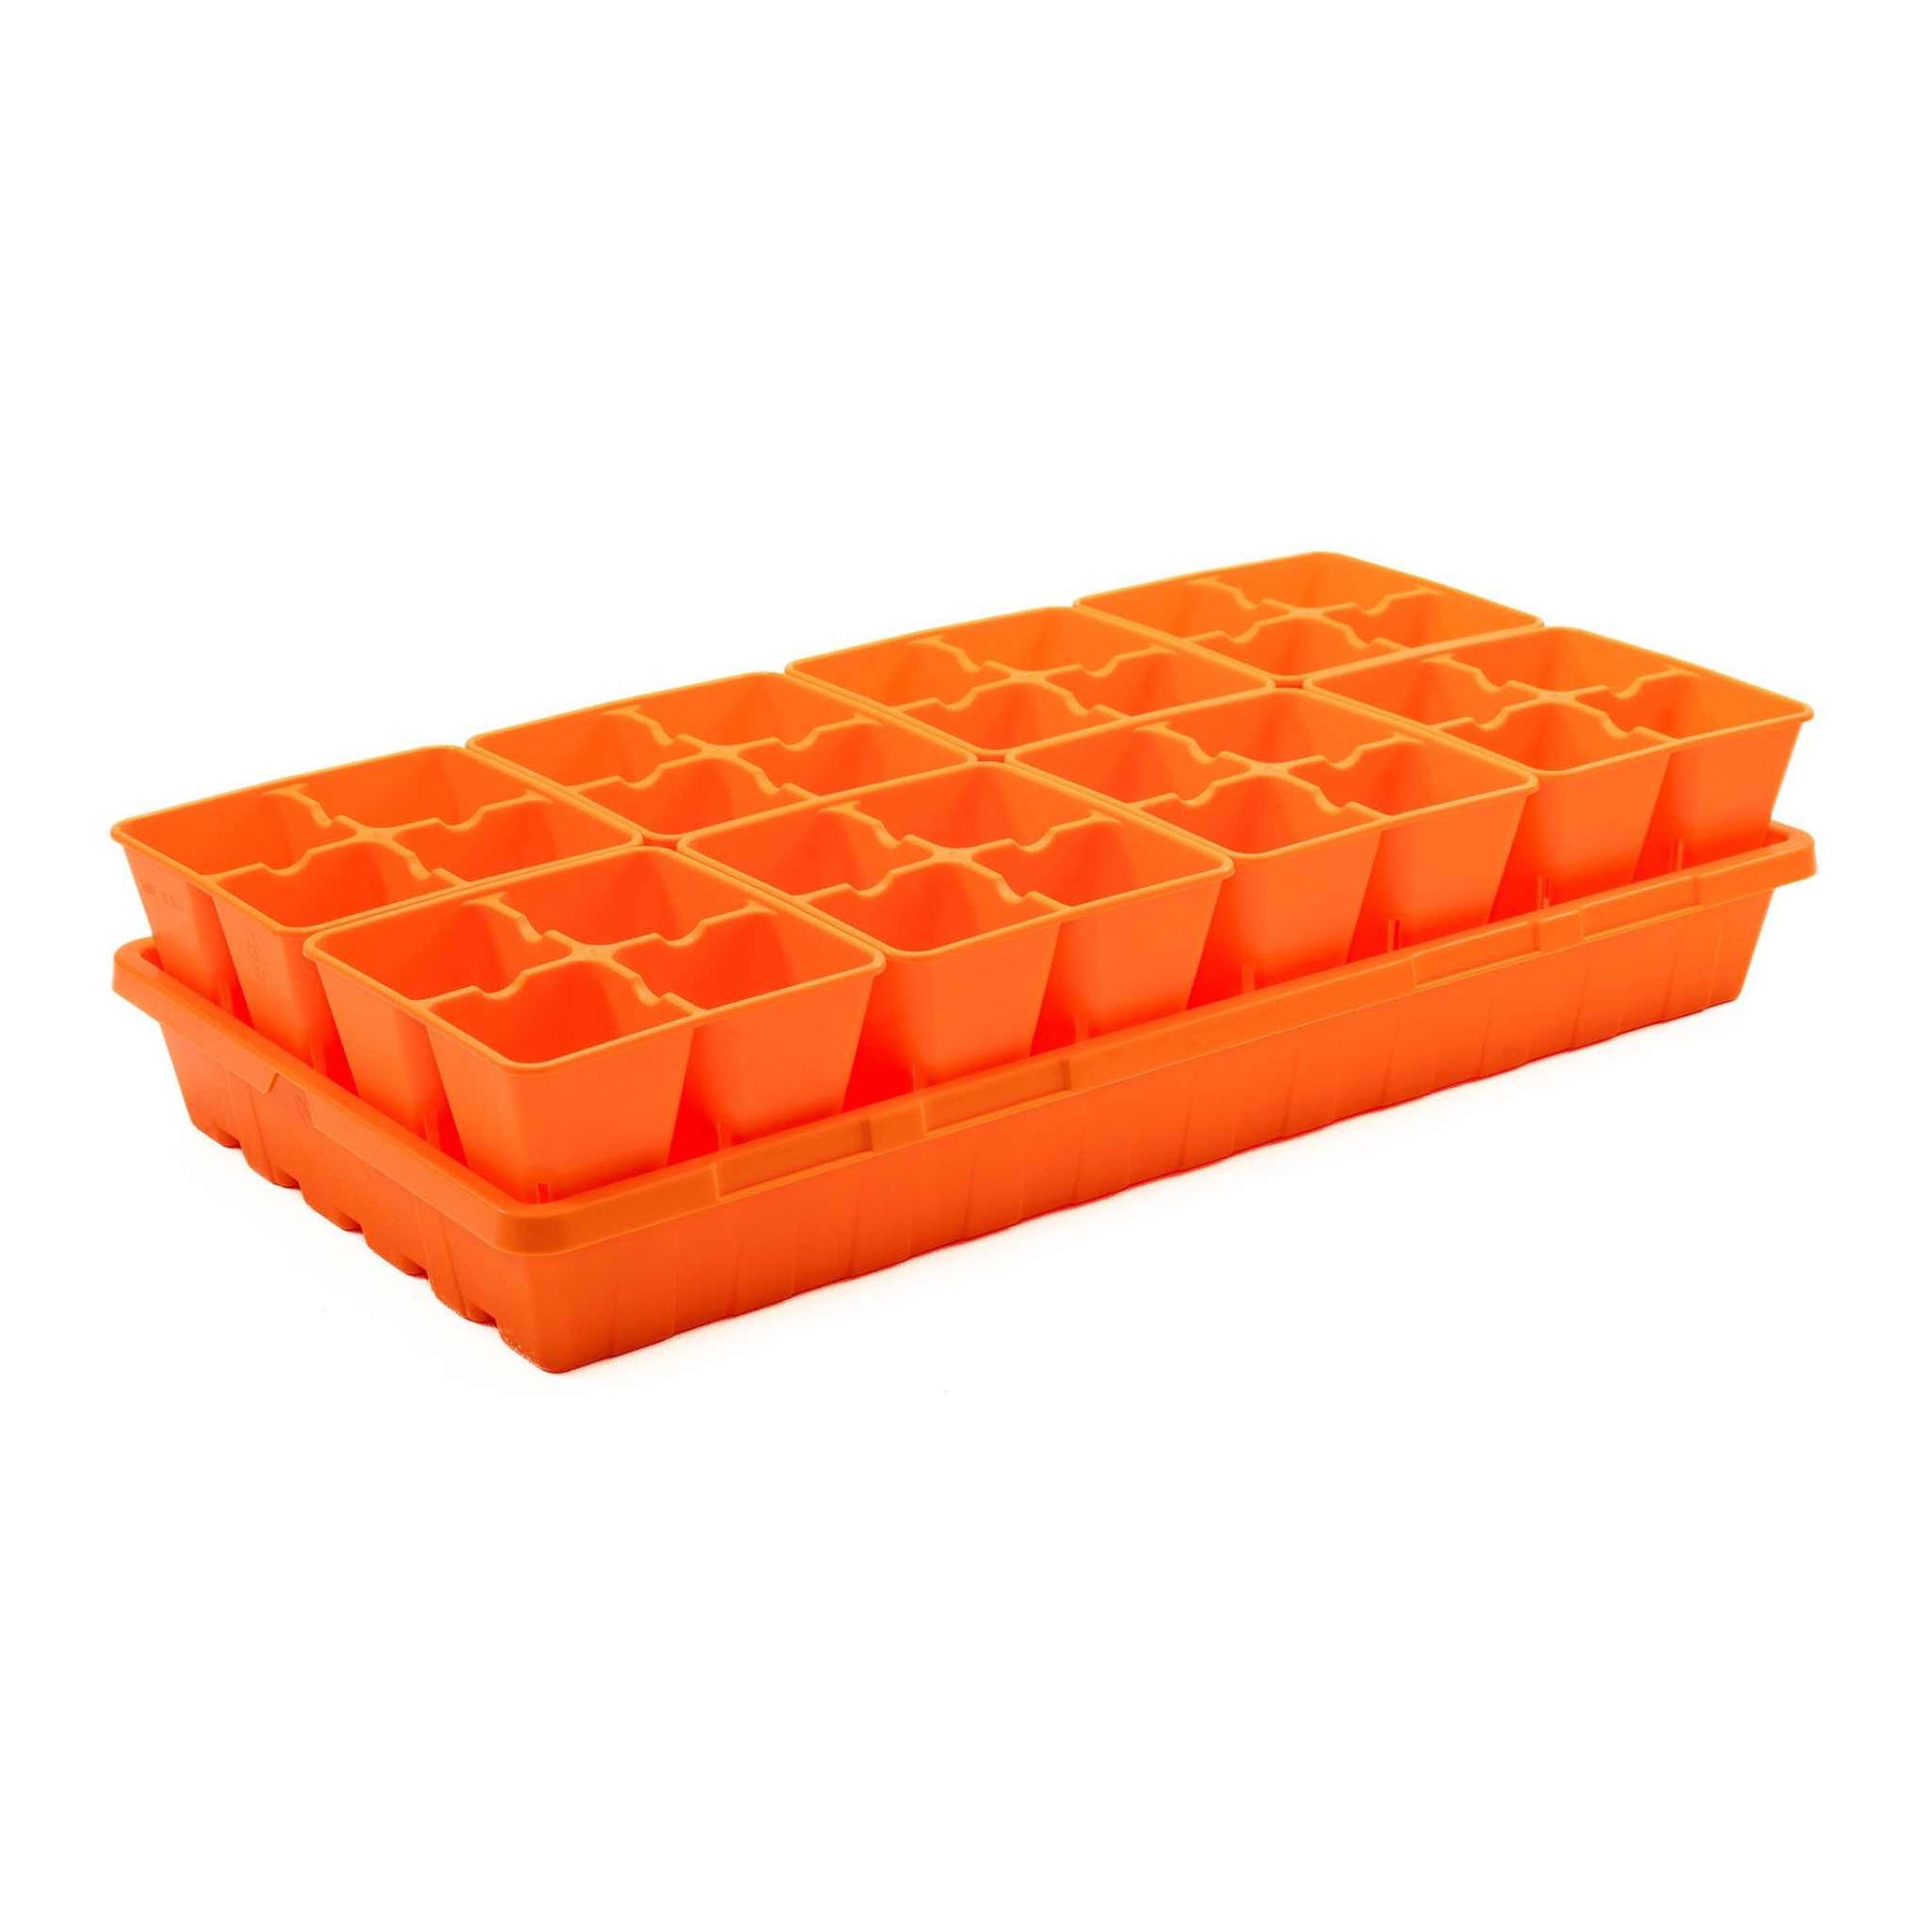 4 cell plug trays inserts in a 1020 orange tray